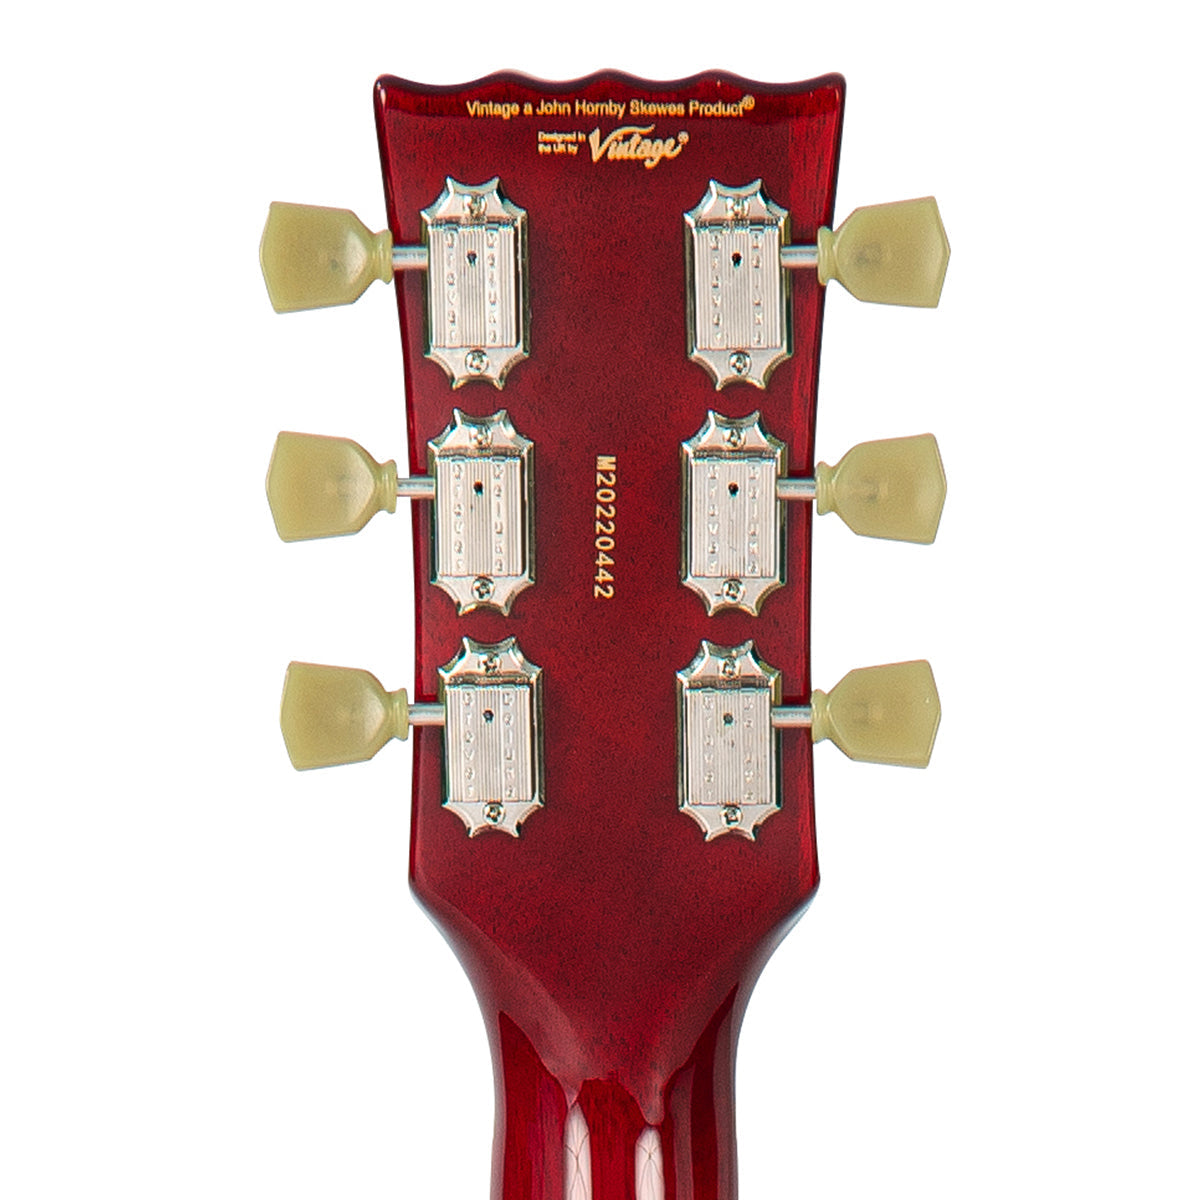 Vintage VSA500P ReIssued Semi Acoustic Guitar ~ Cherry Red, Semi-Acoustic Guitars for sale at Richards Guitars.